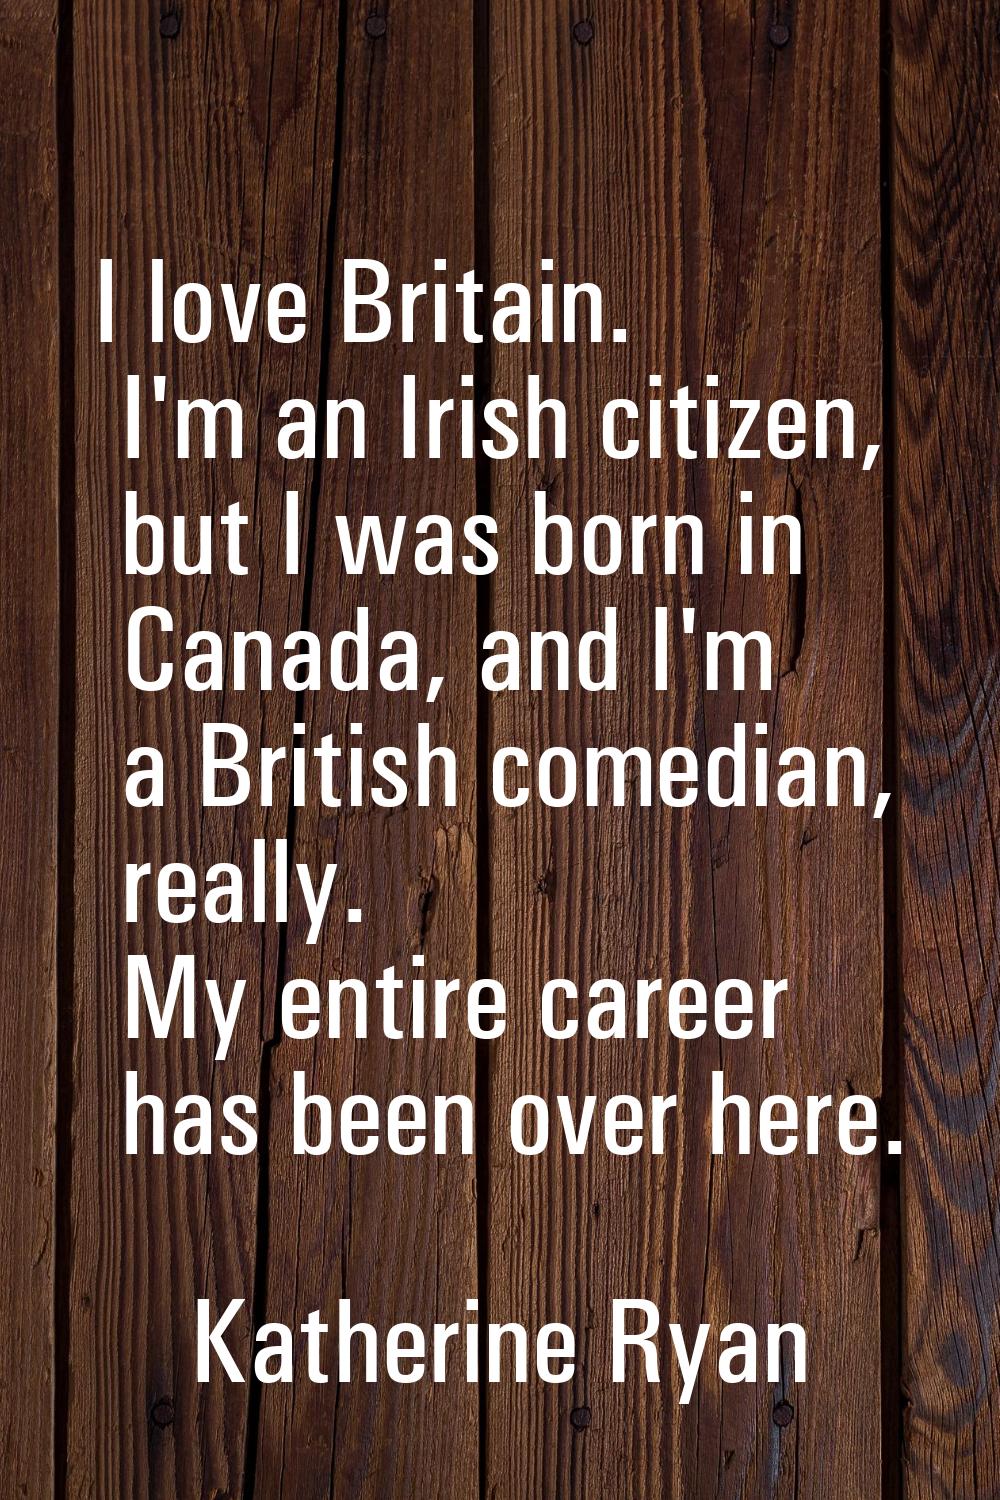 I love Britain. I'm an Irish citizen, but I was born in Canada, and I'm a British comedian, really.